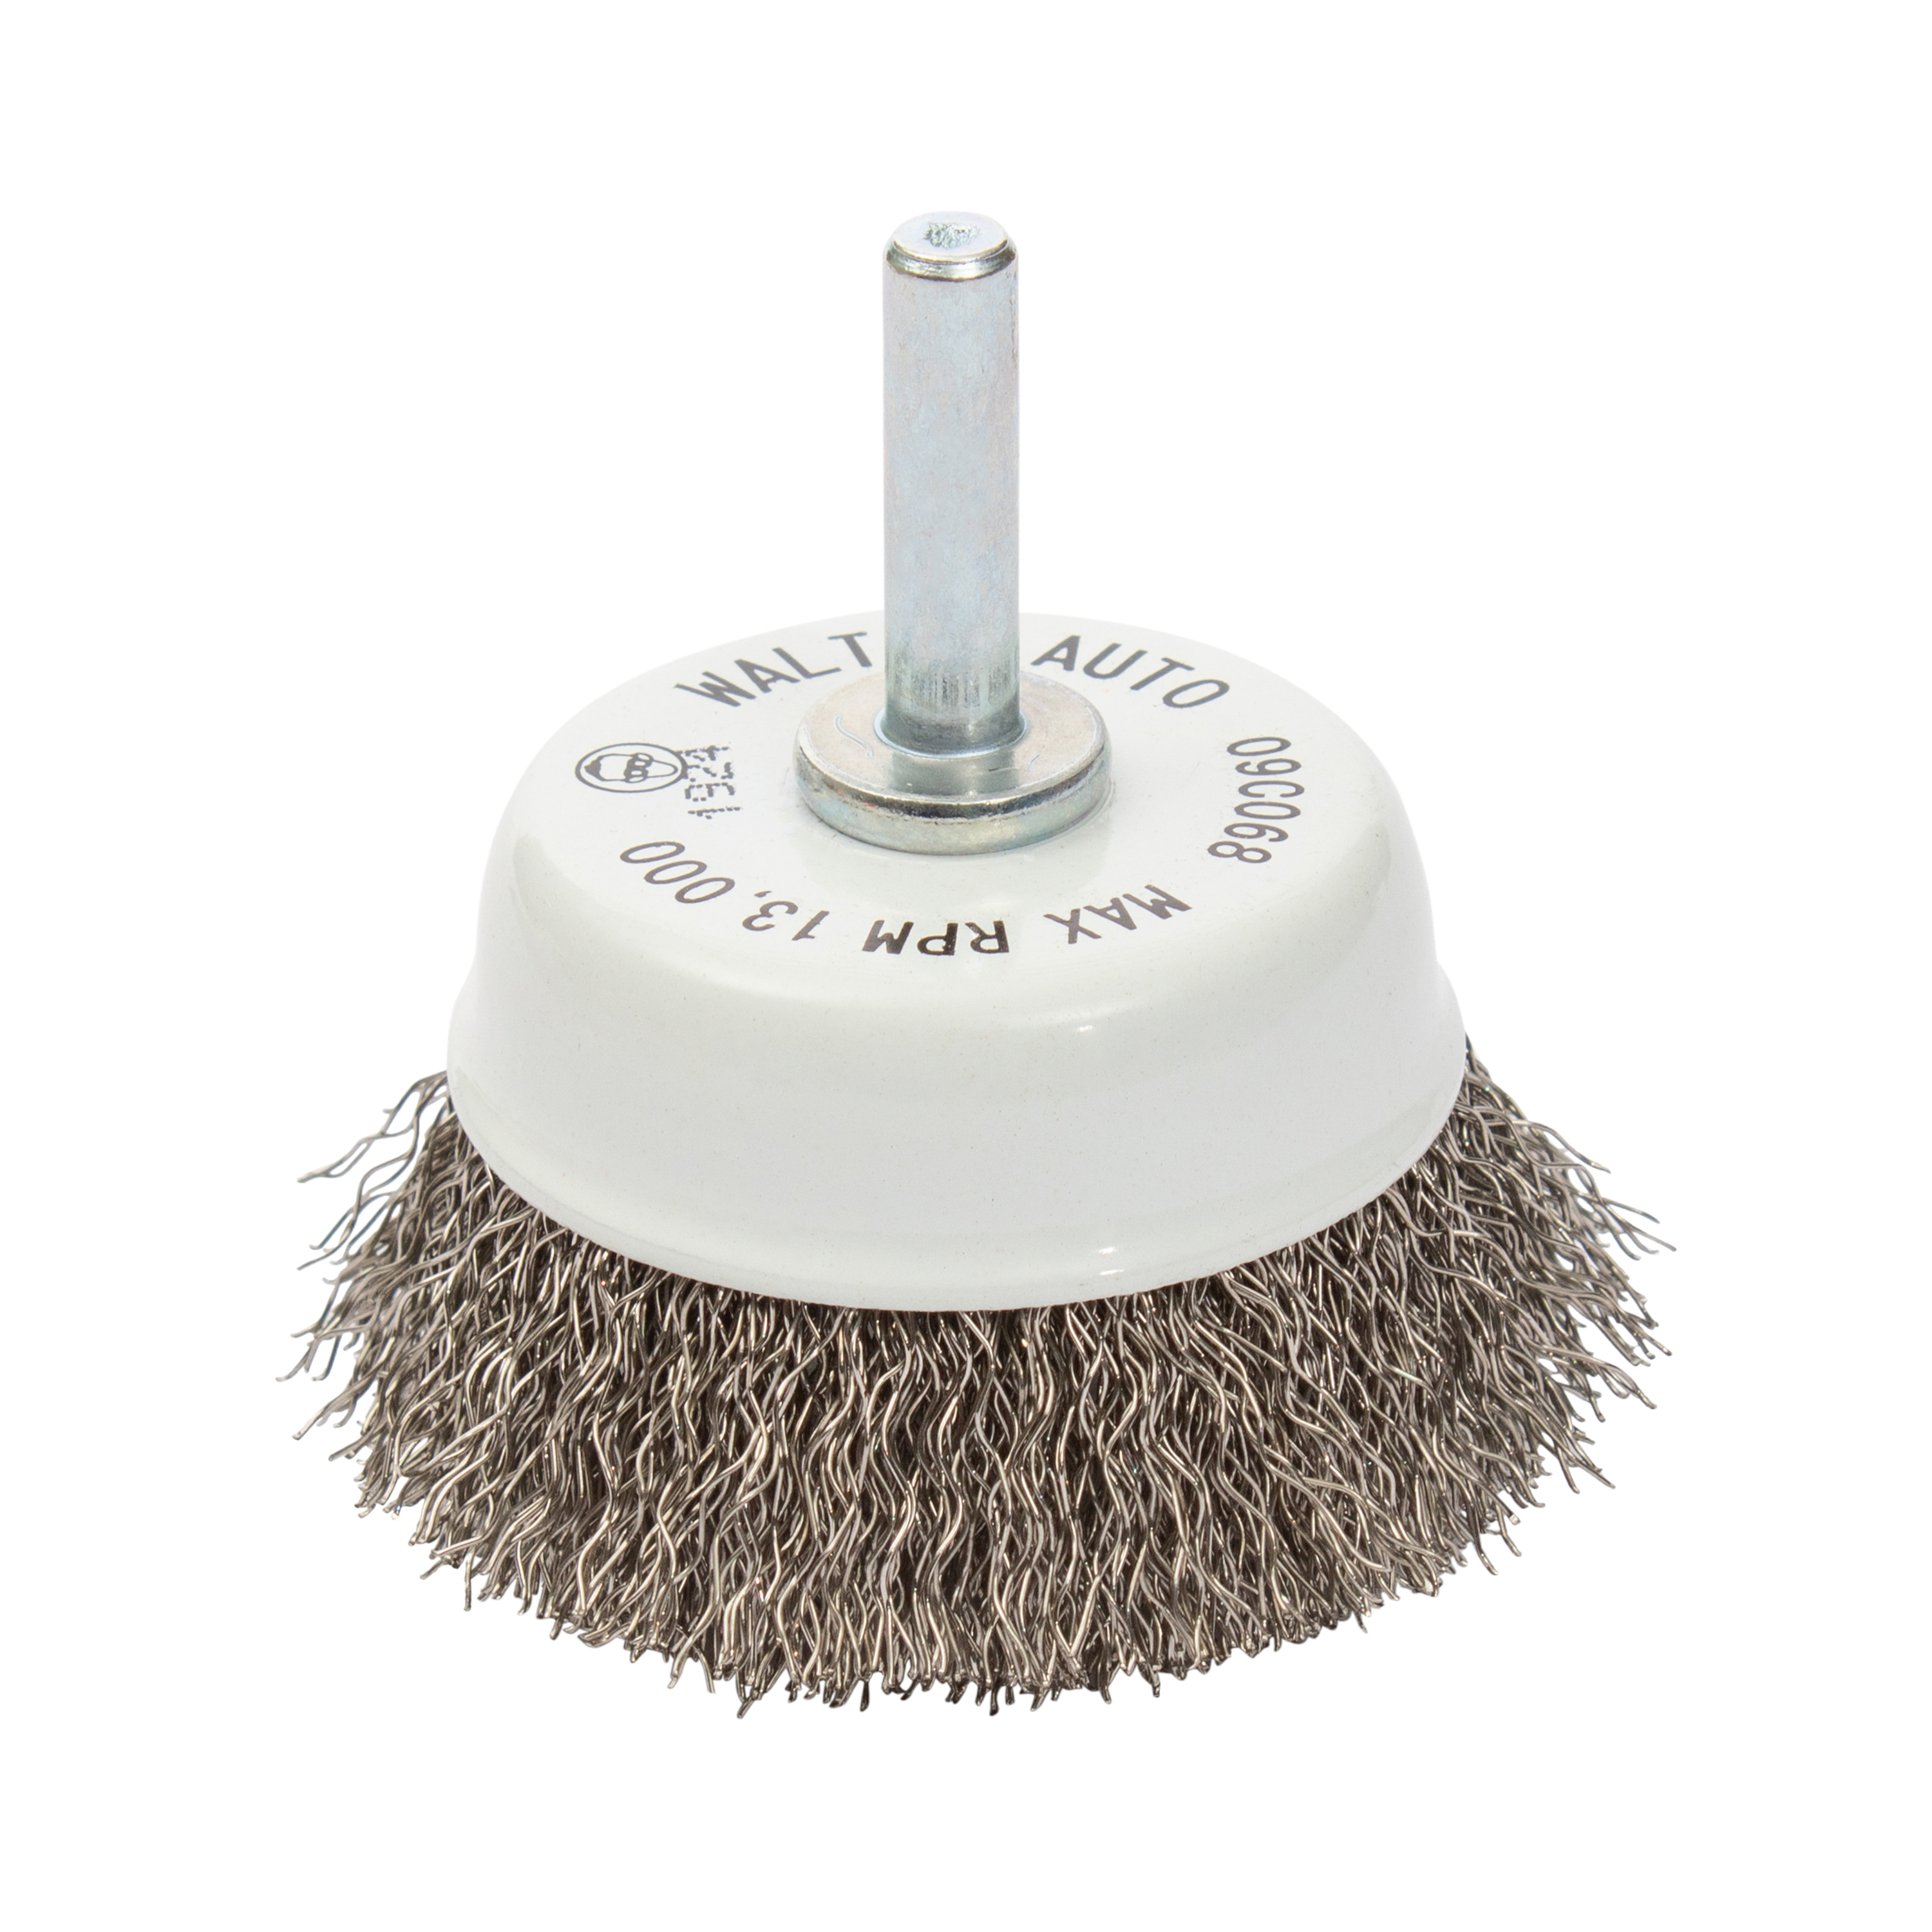 1-1/2 MOUNTED CUP BRUSH - Walter AUTO